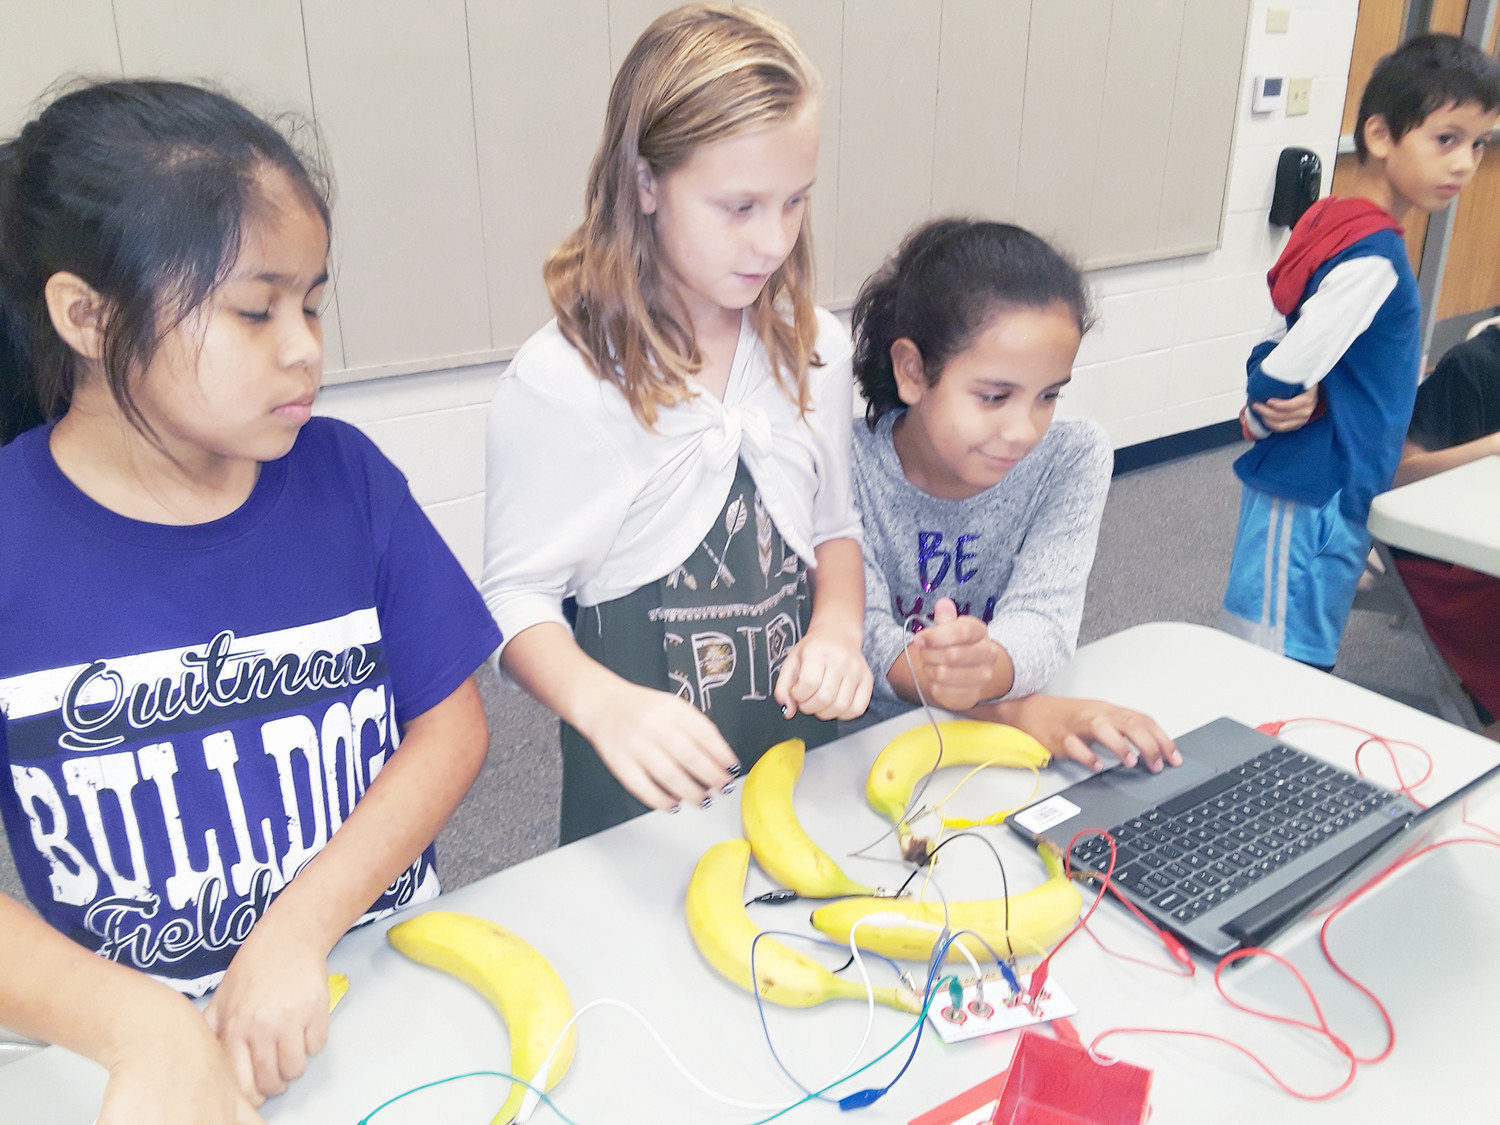 From left to right: Natalie Flores, Kelsey Oakes, Vanessa Saucedo, Rolando Molina work with the “Makey Makey” project in their robotics lab on Sept. 21 for Fab Friday. They divert the electricity to the bananas to see how electricity in machines work. (Monitor photo by Zak Wellerman)